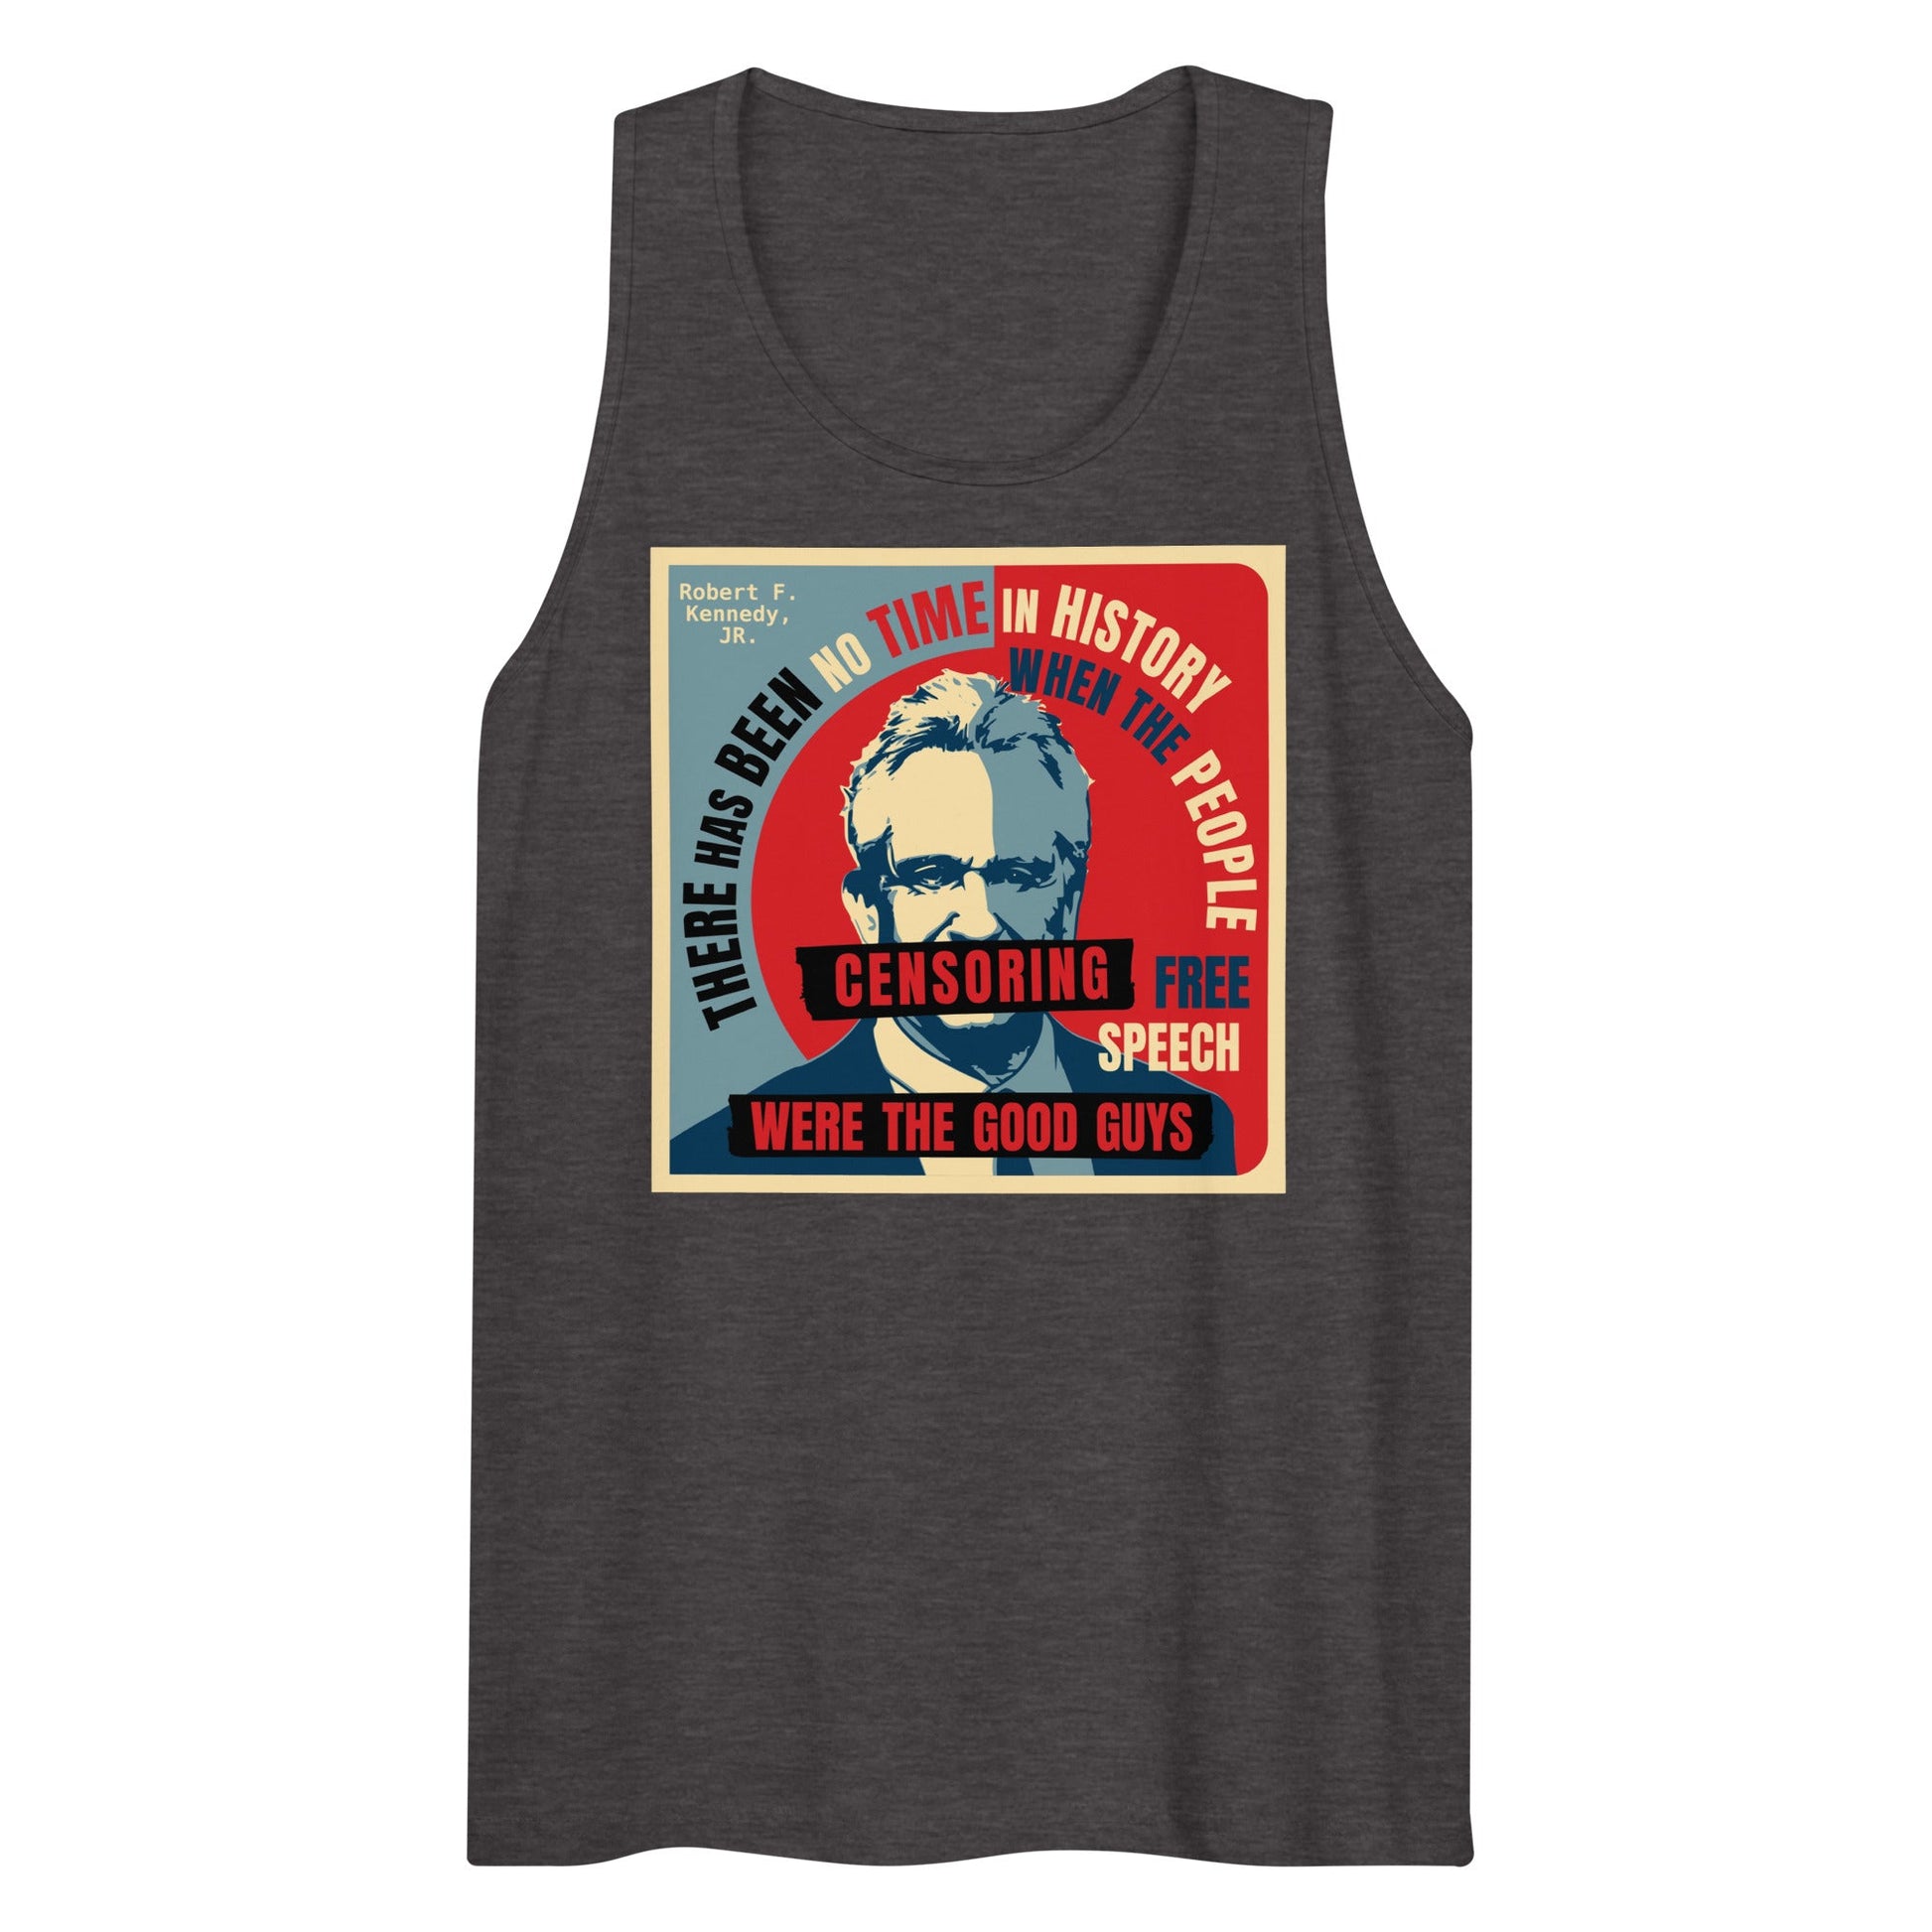 Free Speech Kennedy Men’s Tank Top - TEAM KENNEDY. All rights reserved